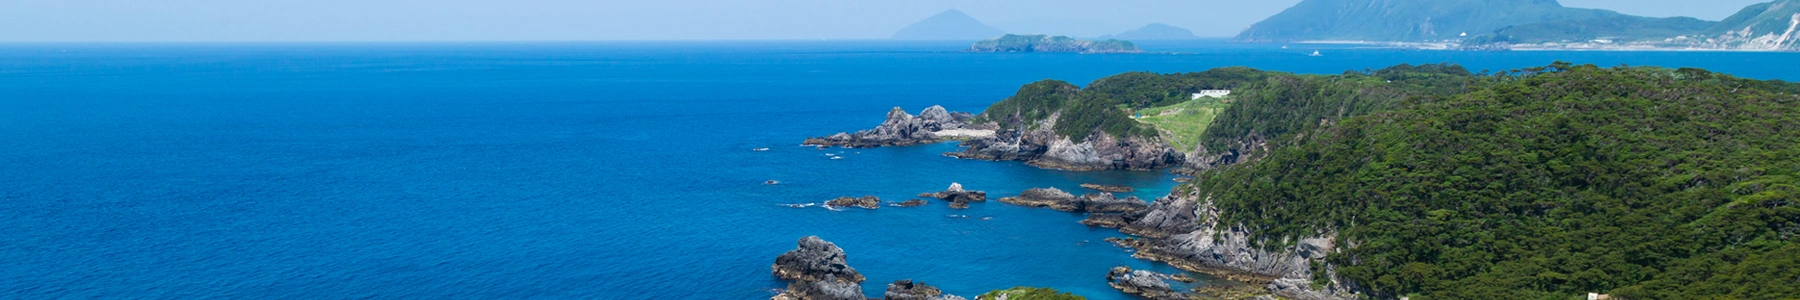 Venture beyond the city to the resort area of “eternal springtime”
Explore Tokyo’s remote islands